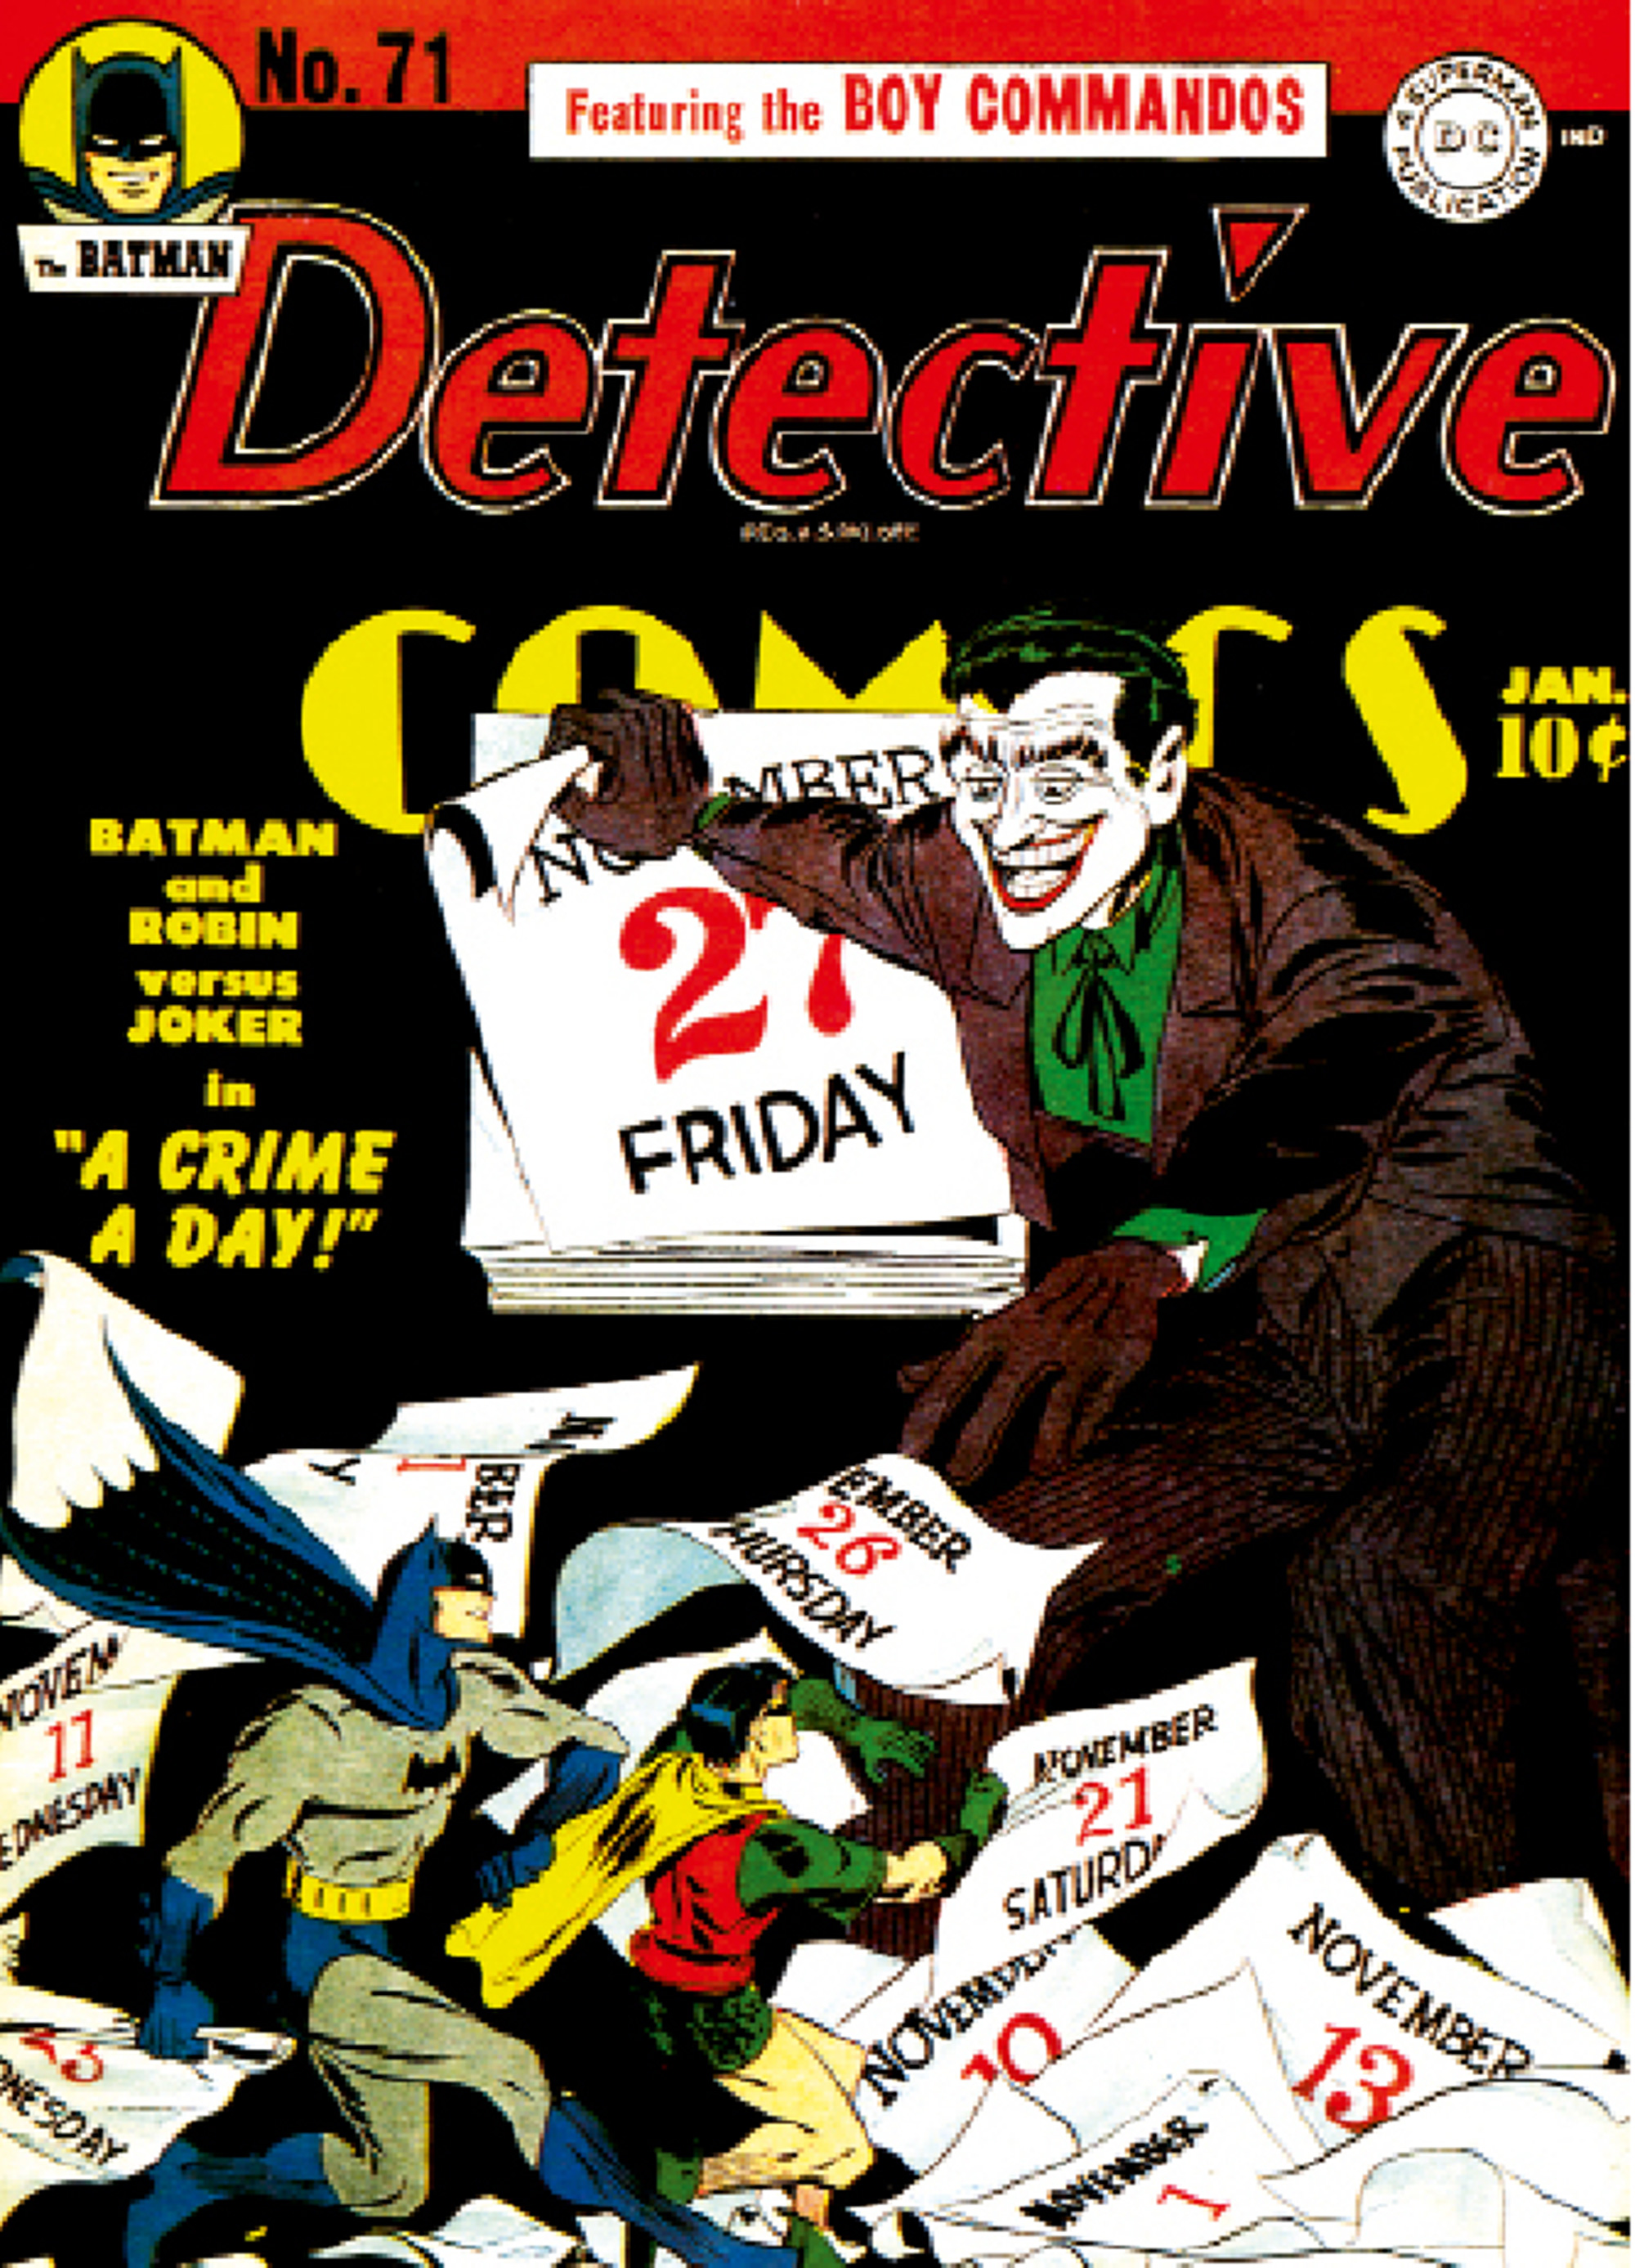 The cover of Detective Comics number seventy-one, published in January nineteen forty-three, which features an early appearance of the Joker. 